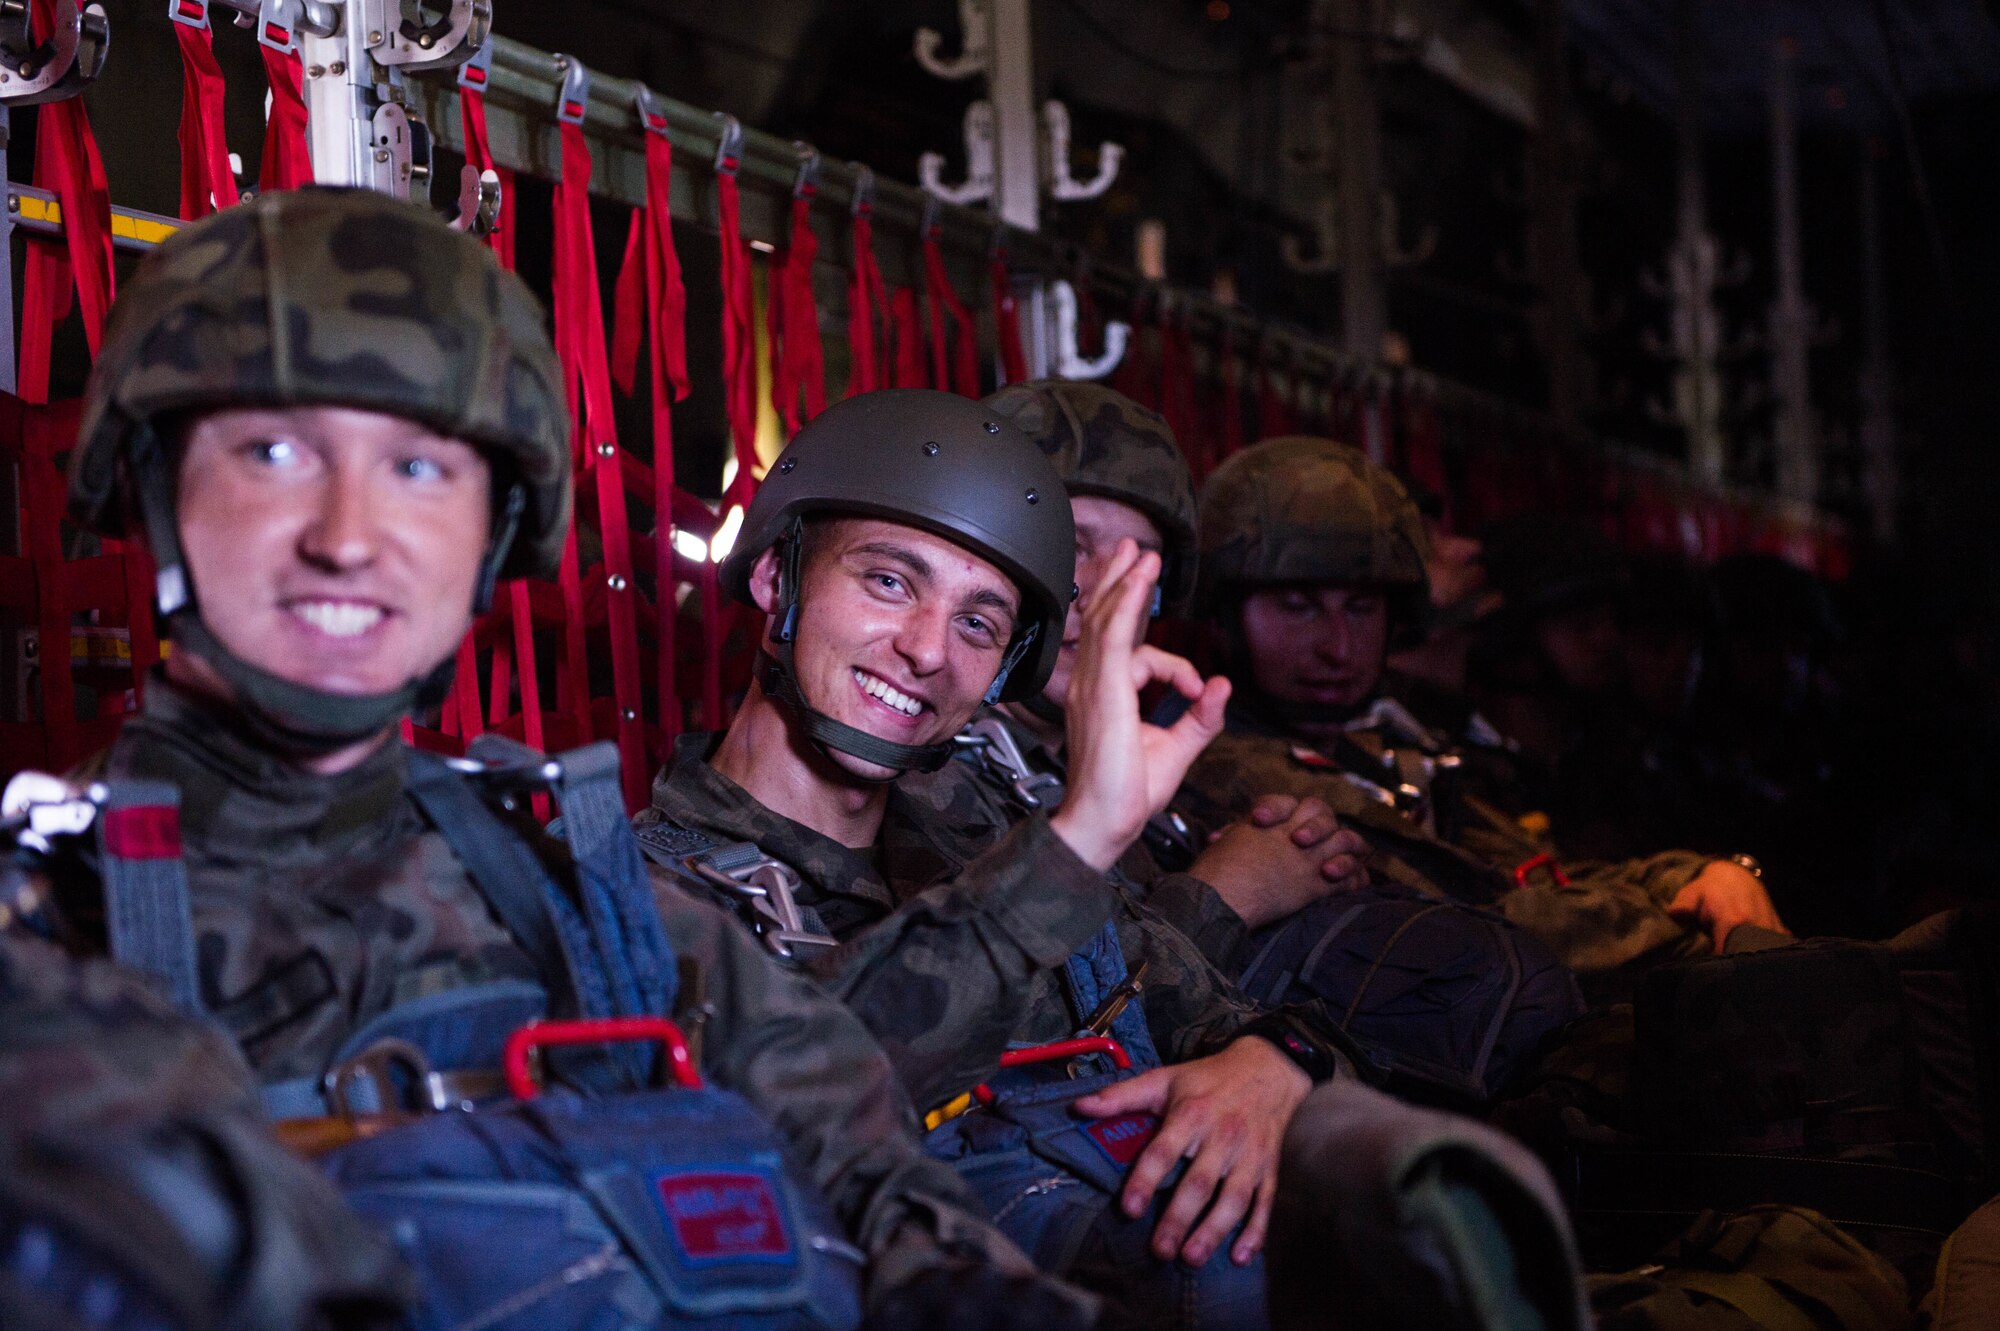 Polish paratroopers sit down after boarding a U.S. Air Force C-130J Super Hercules during Exercise Aviation Rotation 18-4 at Krakow, Poland, Aug. 7, 2018. The airdrop operations conducted during Aviation Rotation were static line jumps and High Altitude-Low Opening jumps. (U.S. Air Force photo by Senior Airman Joshua Magbanua)